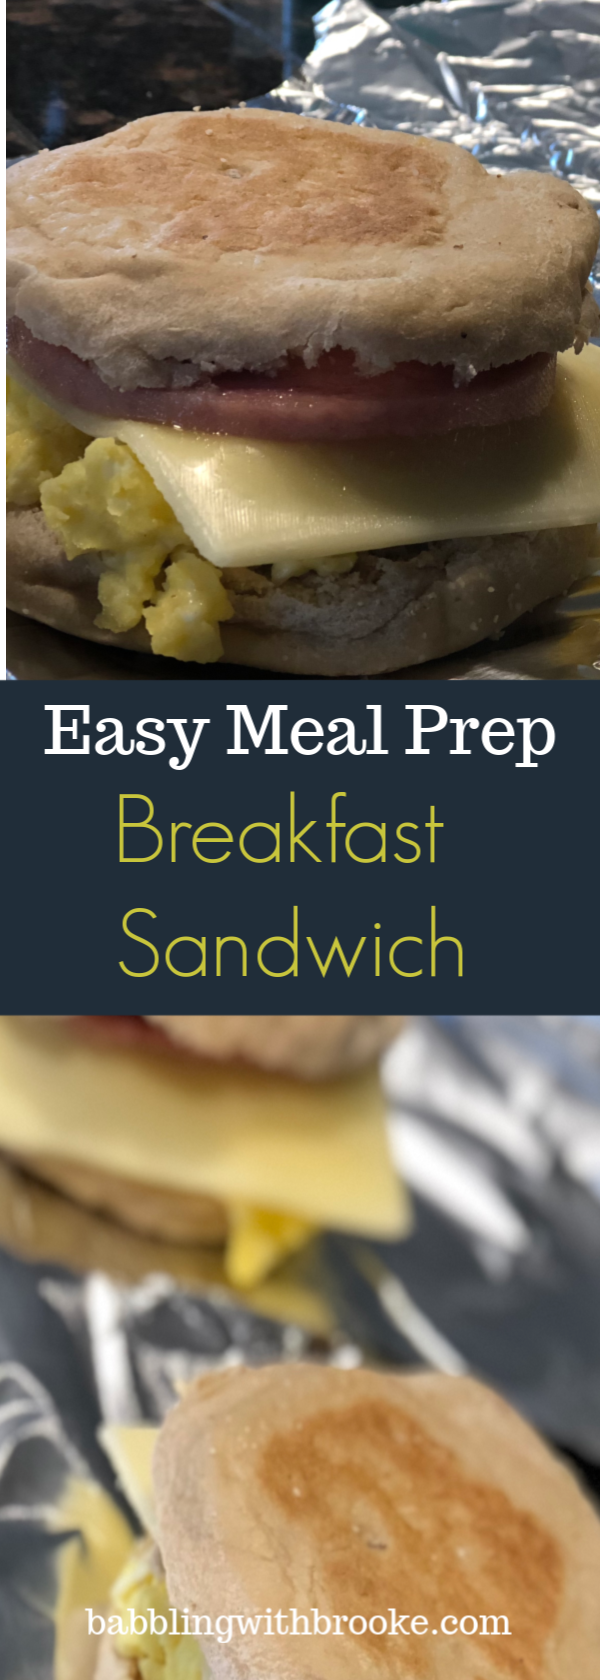 This is a easy, delicious meal prep breakfast for a busy morning on the go! It is totally customizable and easily frozen for weeks at a time. #mealprep #mealprepbreakfast #easybreakfast #breakfastrecipe #mealpreprecipe #easymealpreprecipes